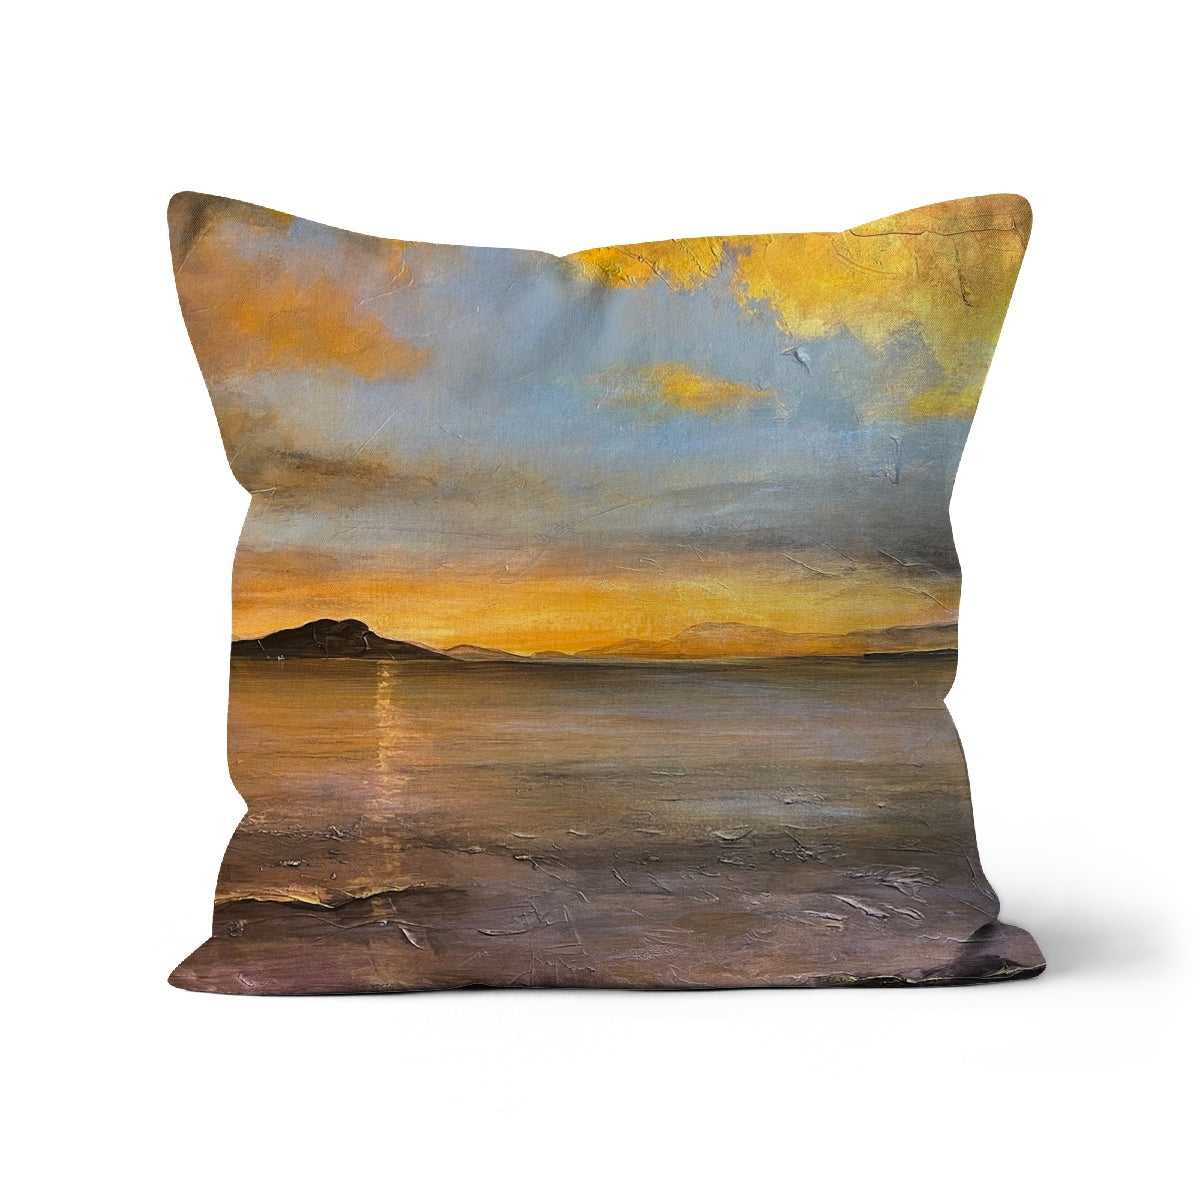 Loch Linnhe Sunset Art Gifts Cushion-Cushions-Scottish Lochs & Mountains Art Gallery-Linen-12"x12"-Paintings, Prints, Homeware, Art Gifts From Scotland By Scottish Artist Kevin Hunter